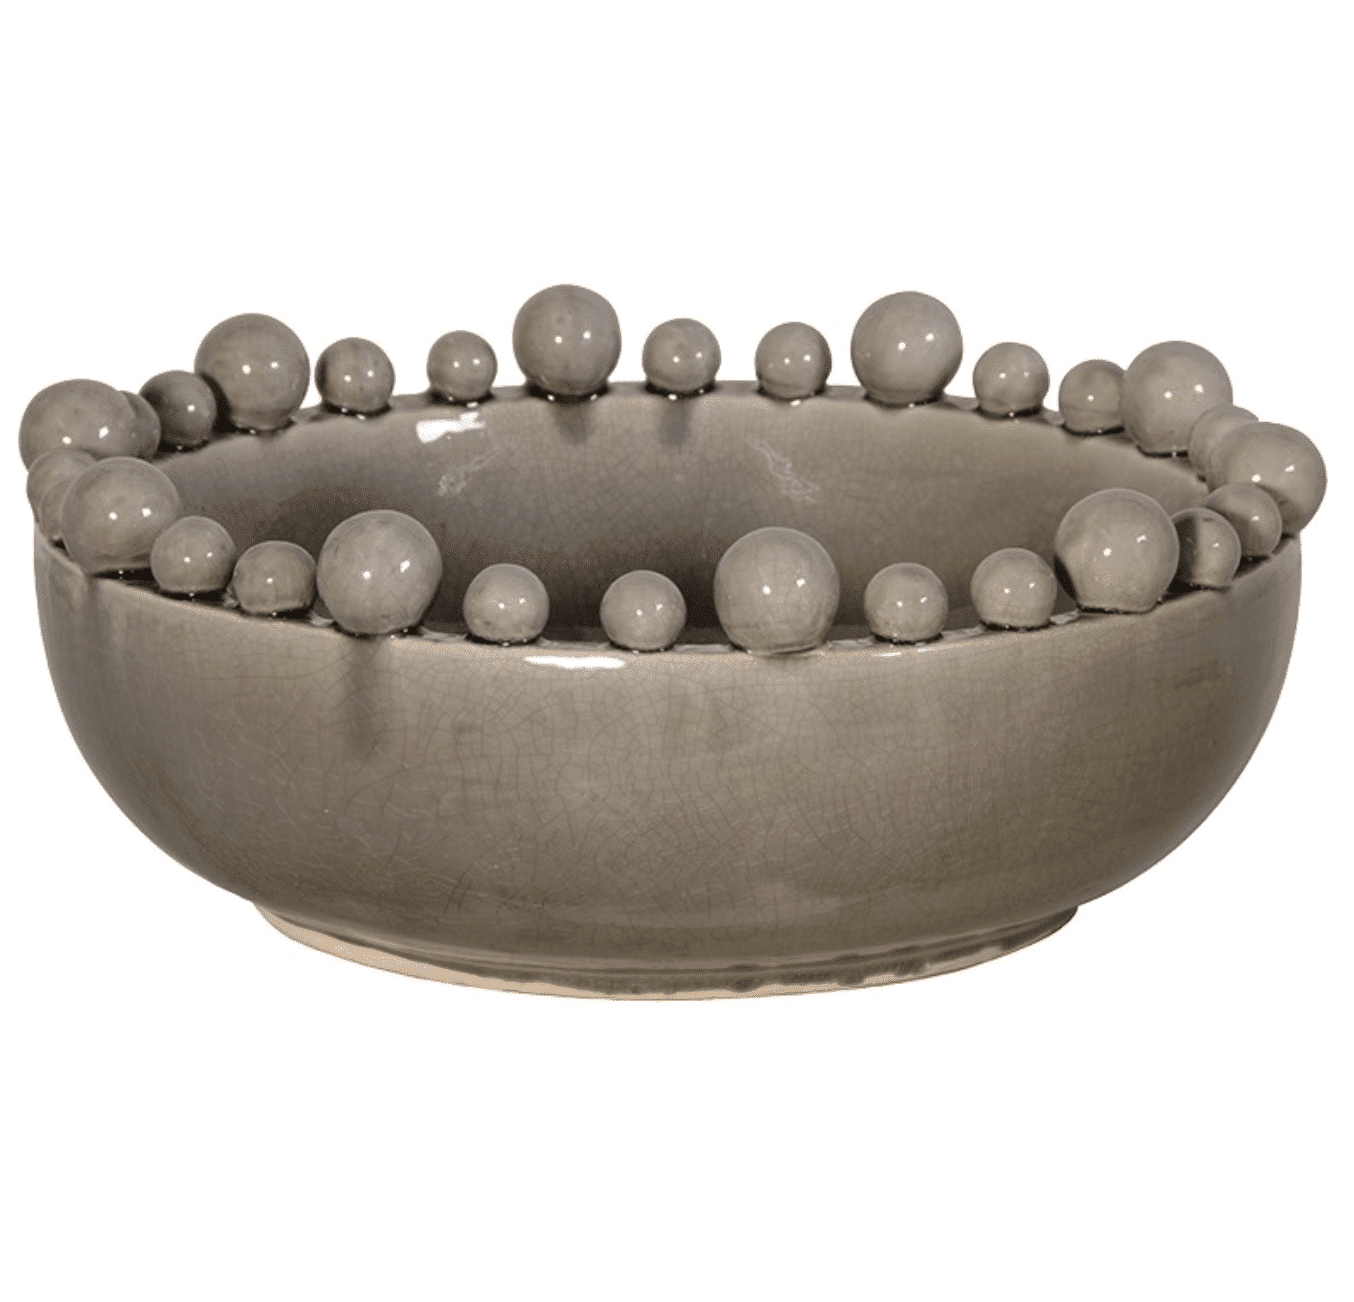 A chic taupe bowl with decorative rim